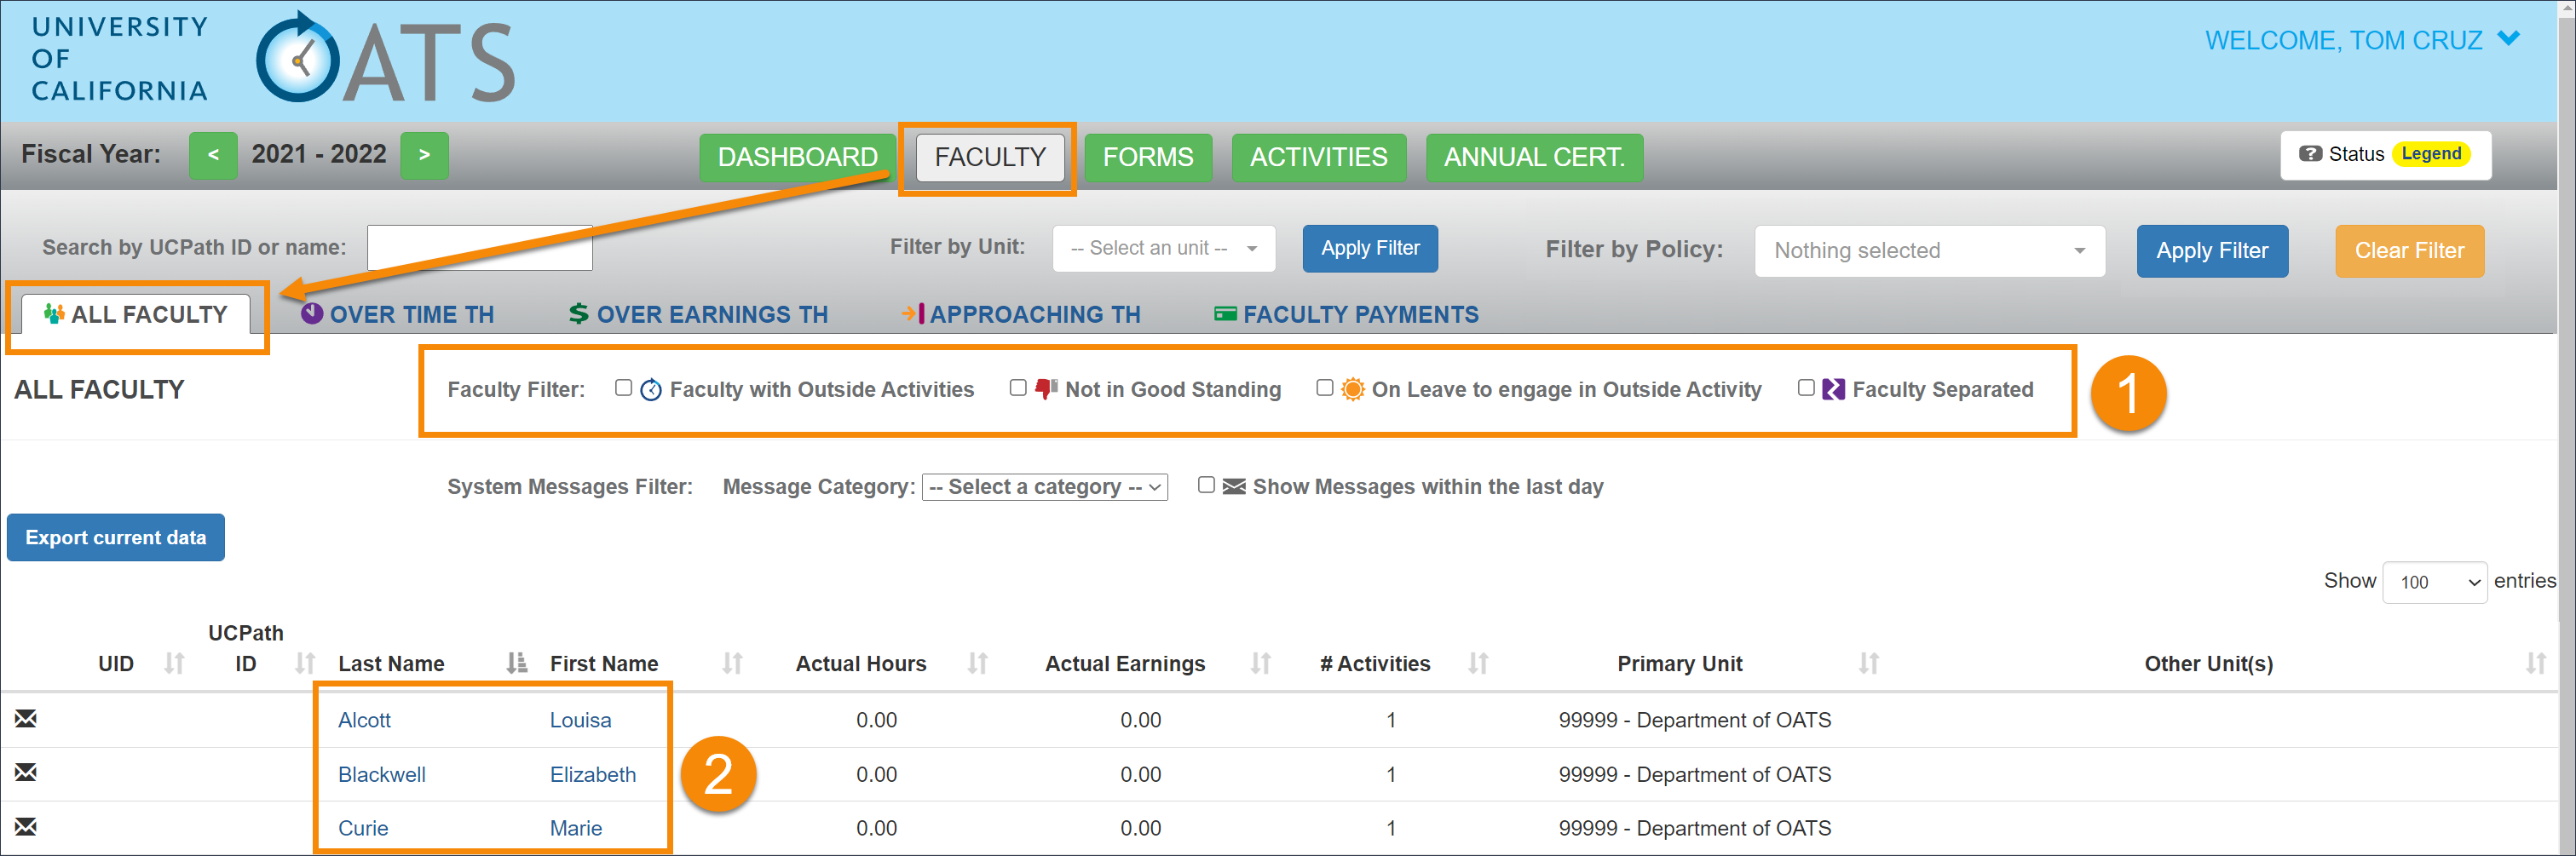 faculty tab that displays all faculty within the selected department/unit with filter options